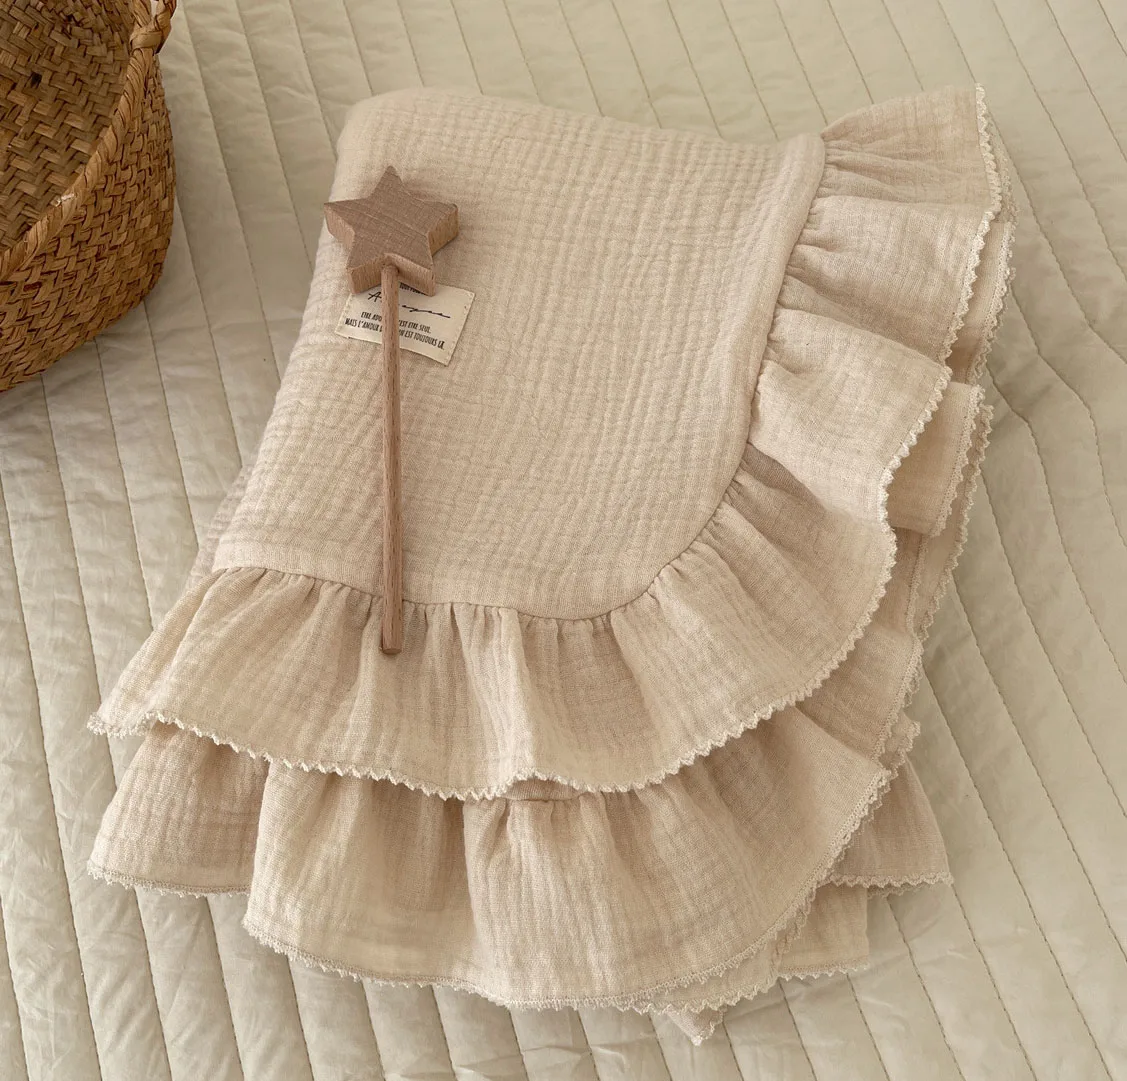 Muslin Baby Swaddle Blanket 4-Layered Cotton Muslin Baby Girls Receiving Blanket with Ruffle Edge Skin-Friendly Baby Wrap